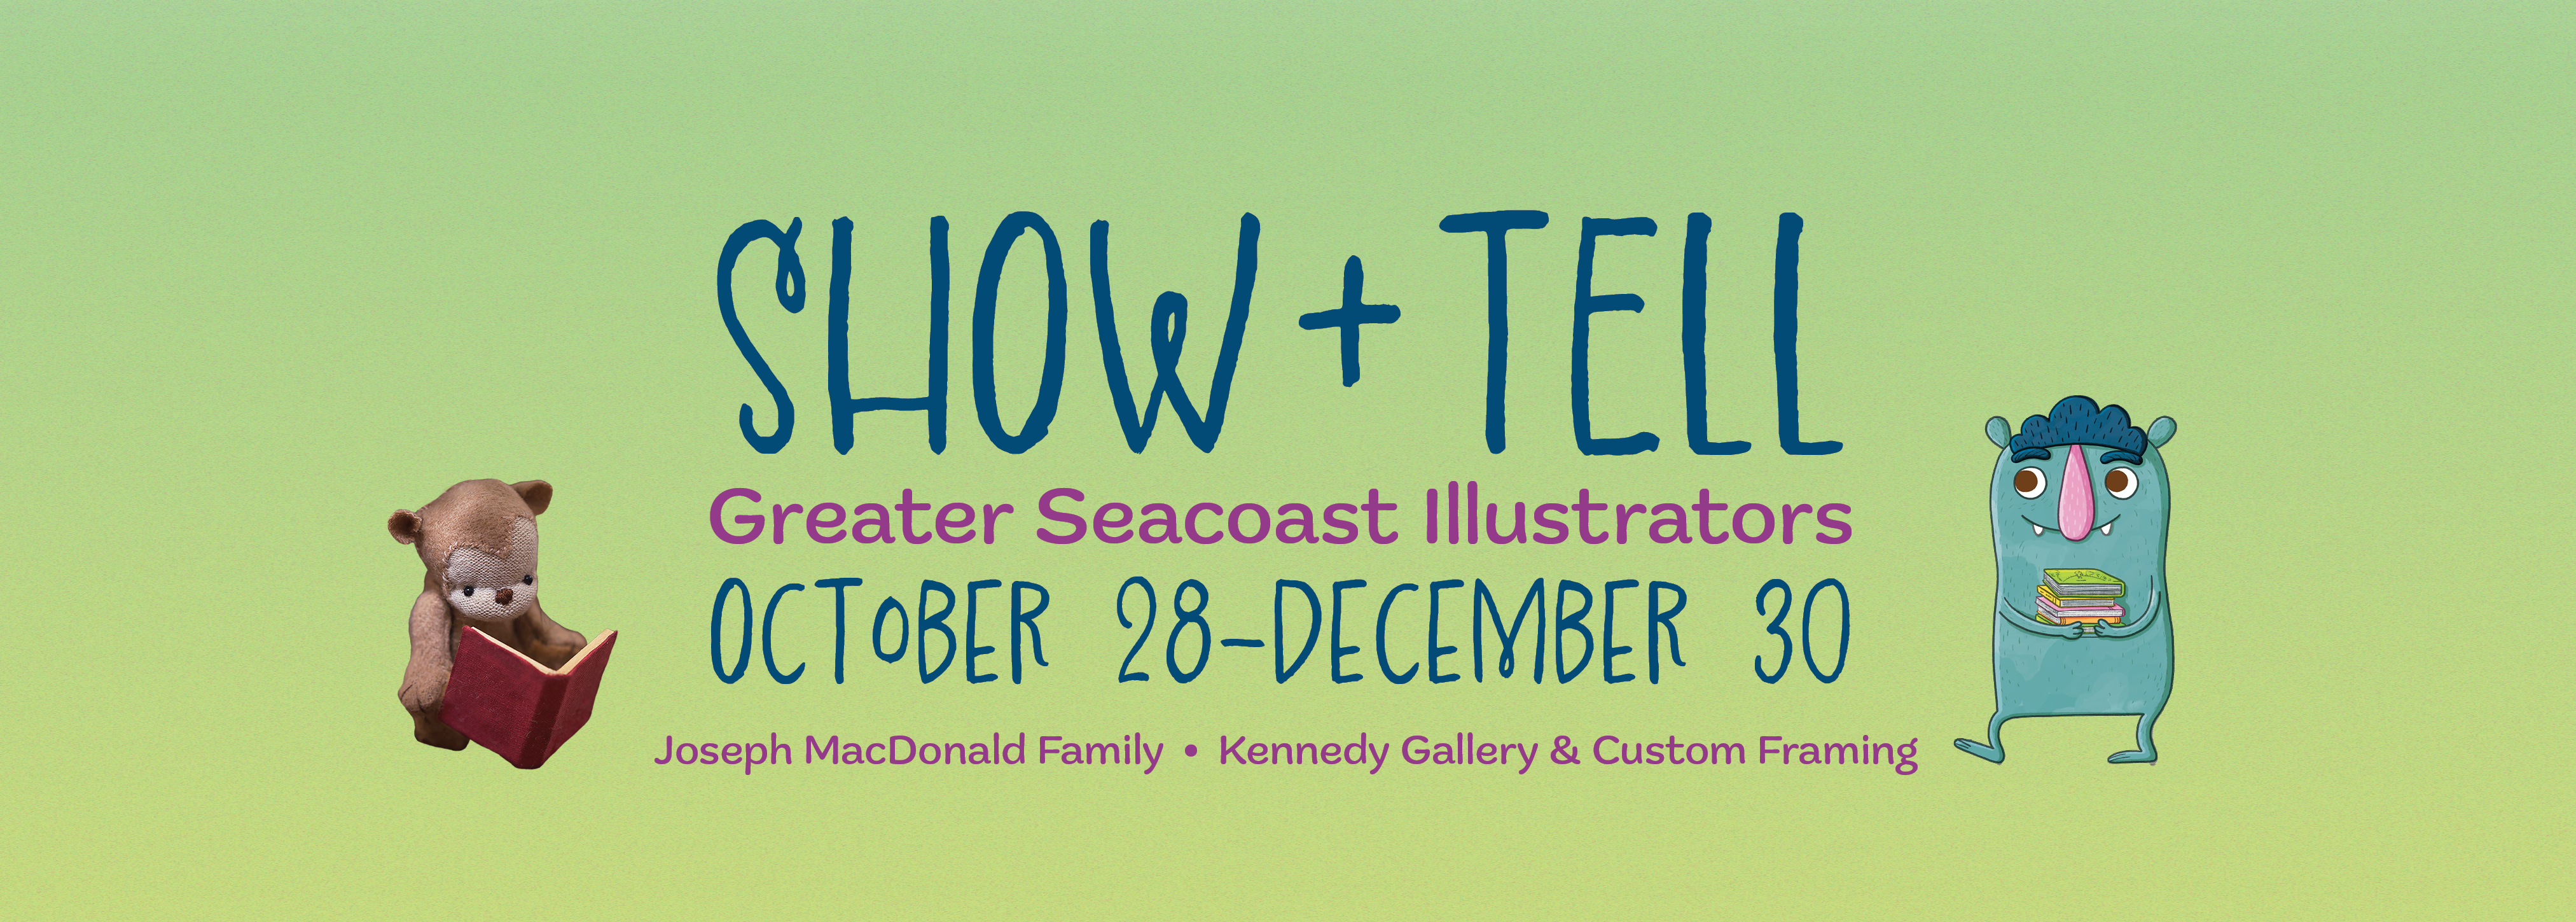 Show+ Tell Exhibition featuring Greater Seacoast Illustrators. Image has a green background and several characters featured in these illustrated books below.